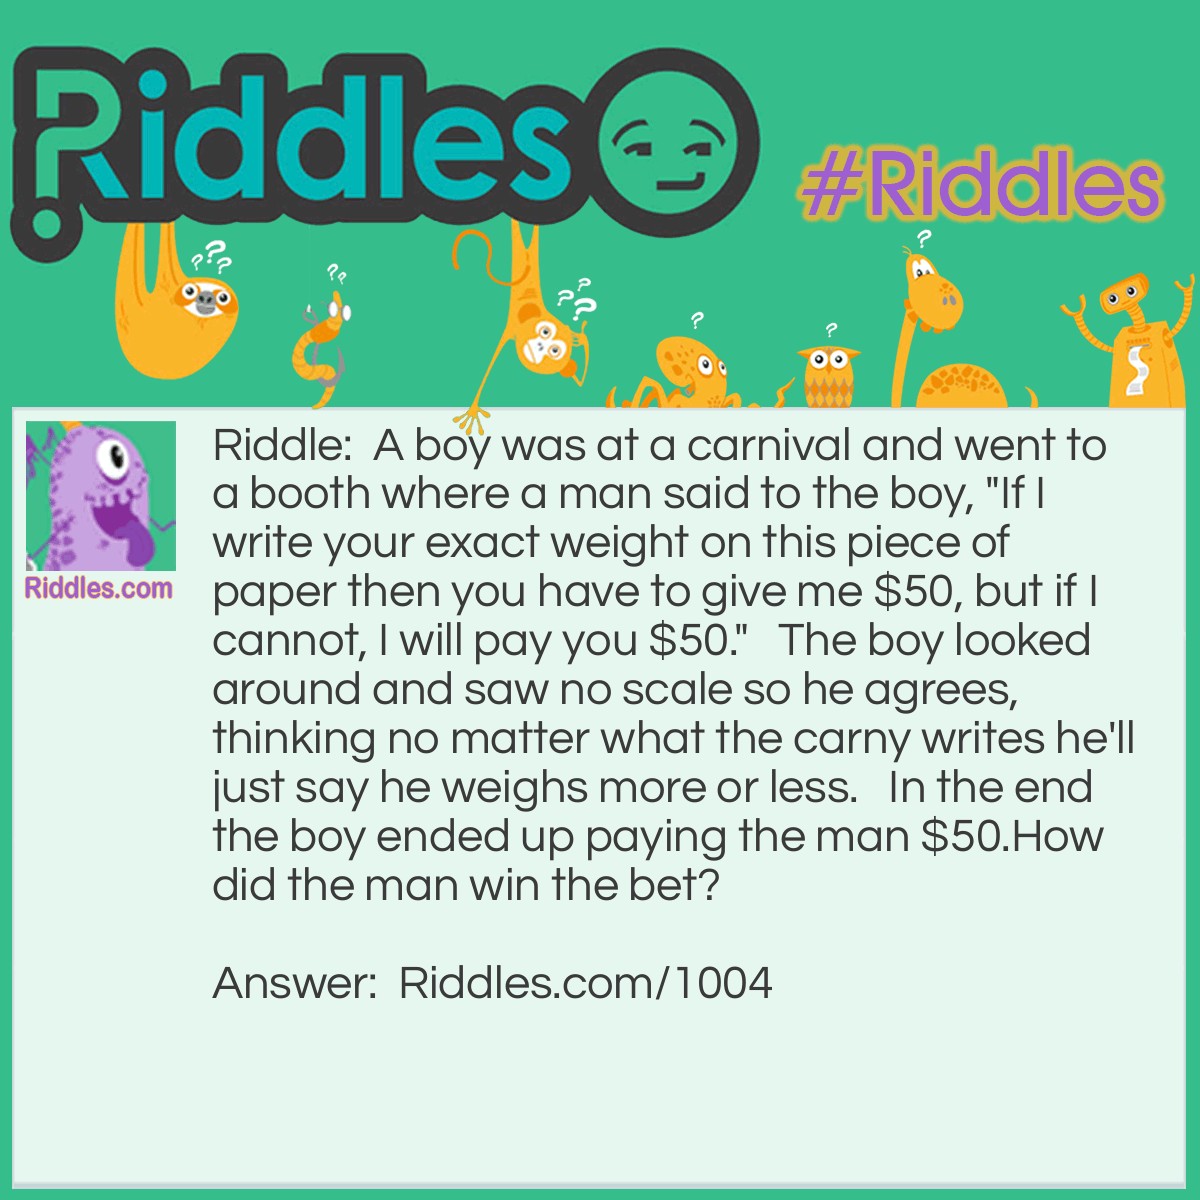 Riddle: A boy was at a carnival and went to a booth where a man said to the boy, "If I write your exact weight on this piece of paper then you have to give me $50, but if I cannot, I will pay you $50."   The boy looked around and saw no scale so he agrees, thinking no matter what the carny writes he'll just say he weighs more or less.   In the end the boy ended up paying the man $50.
How did the man win the bet? Answer: The man did exactly as he said he would and wrote "your exact weight" on the paper